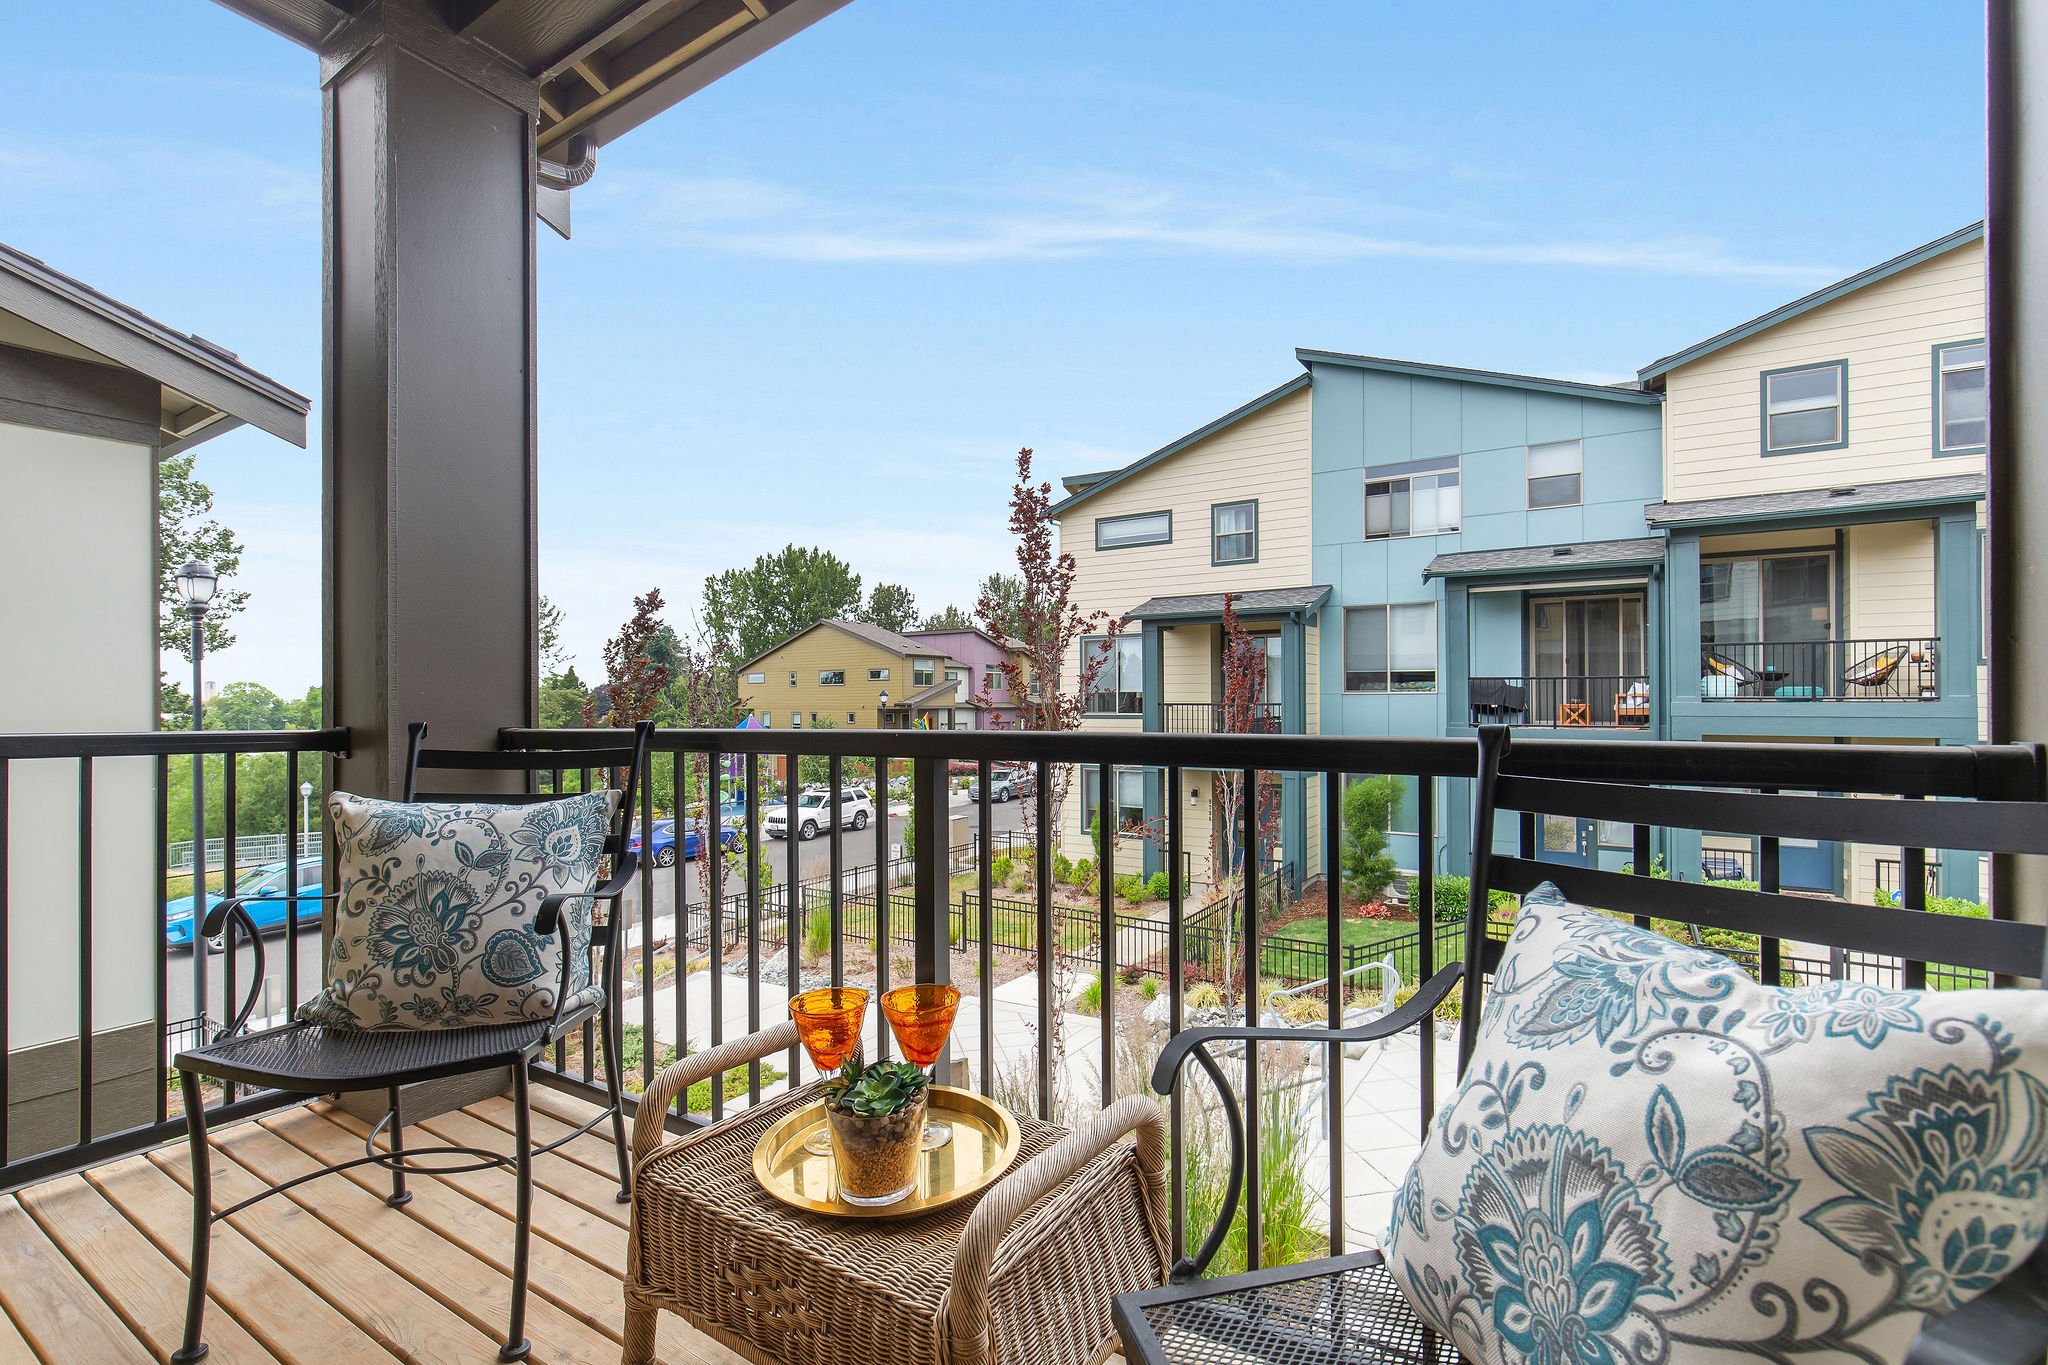  image description: balcony with outdoor chairs and table 